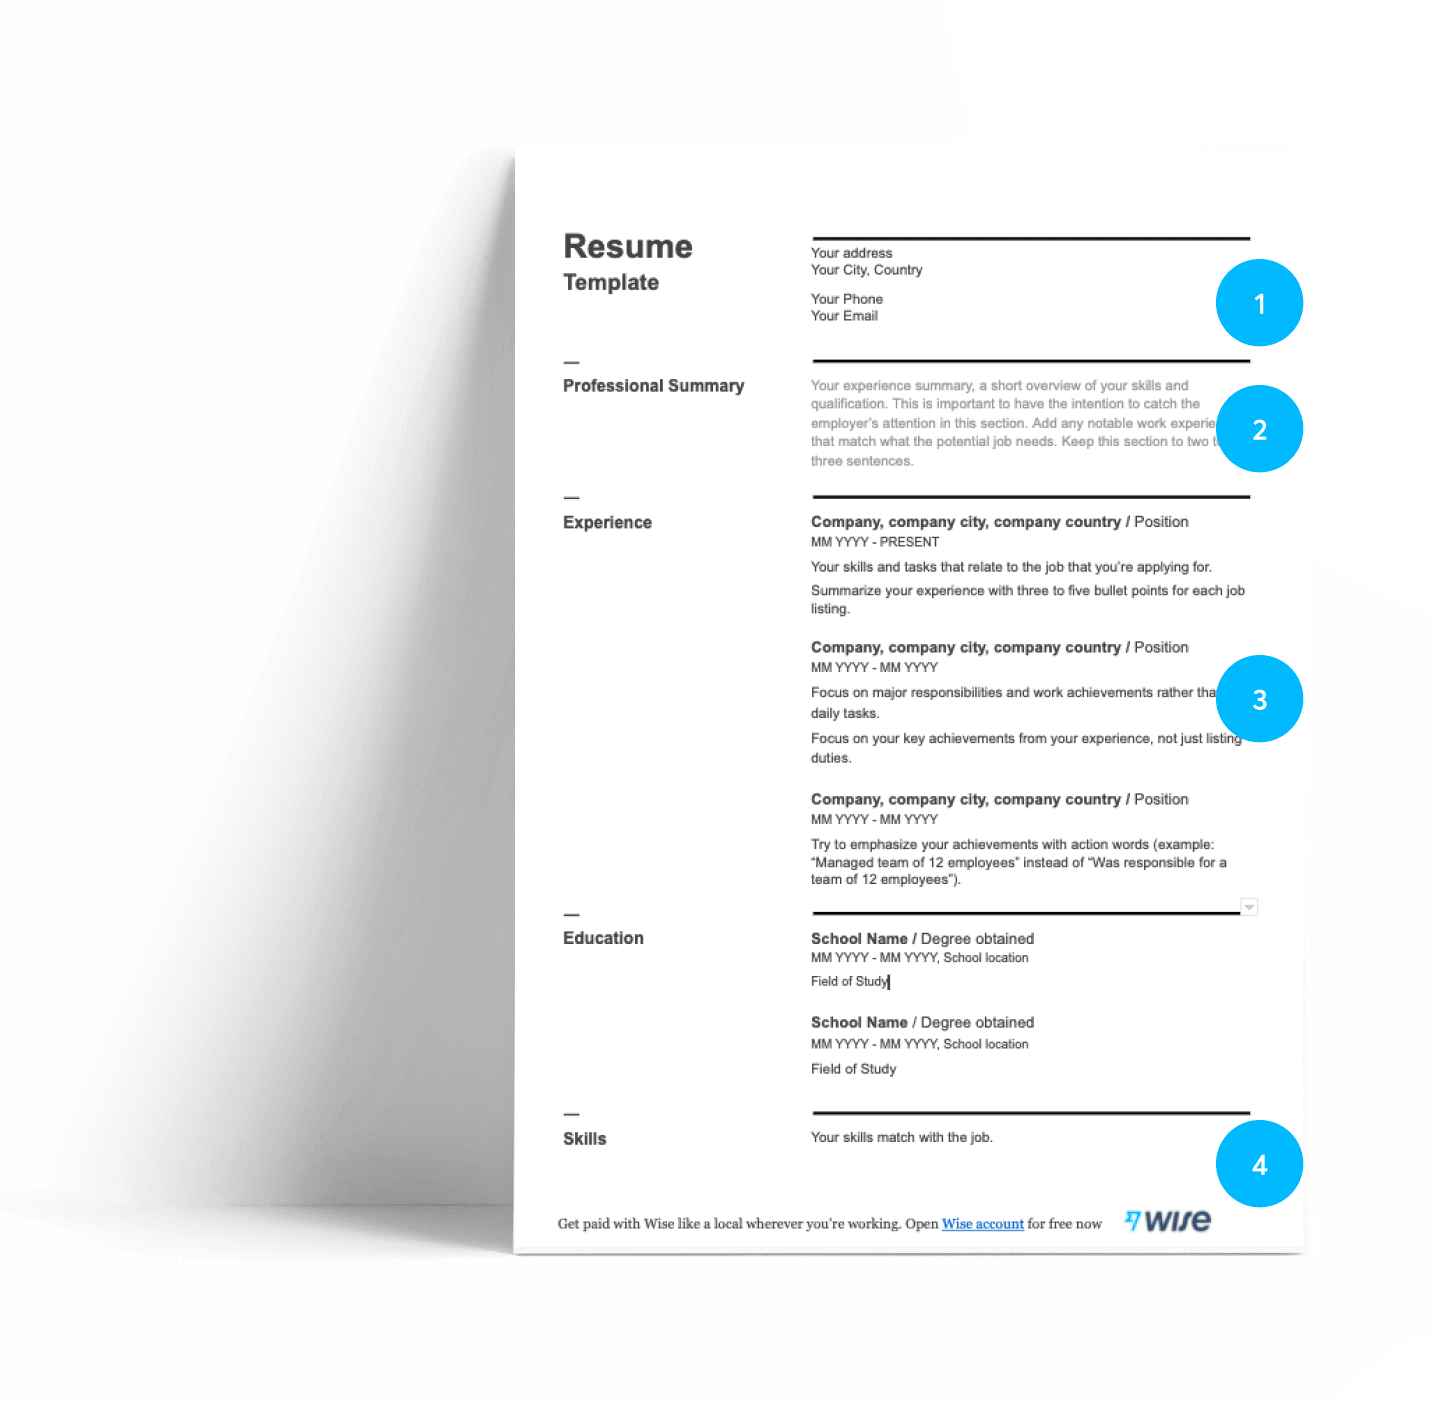 How to write a an artist resume?